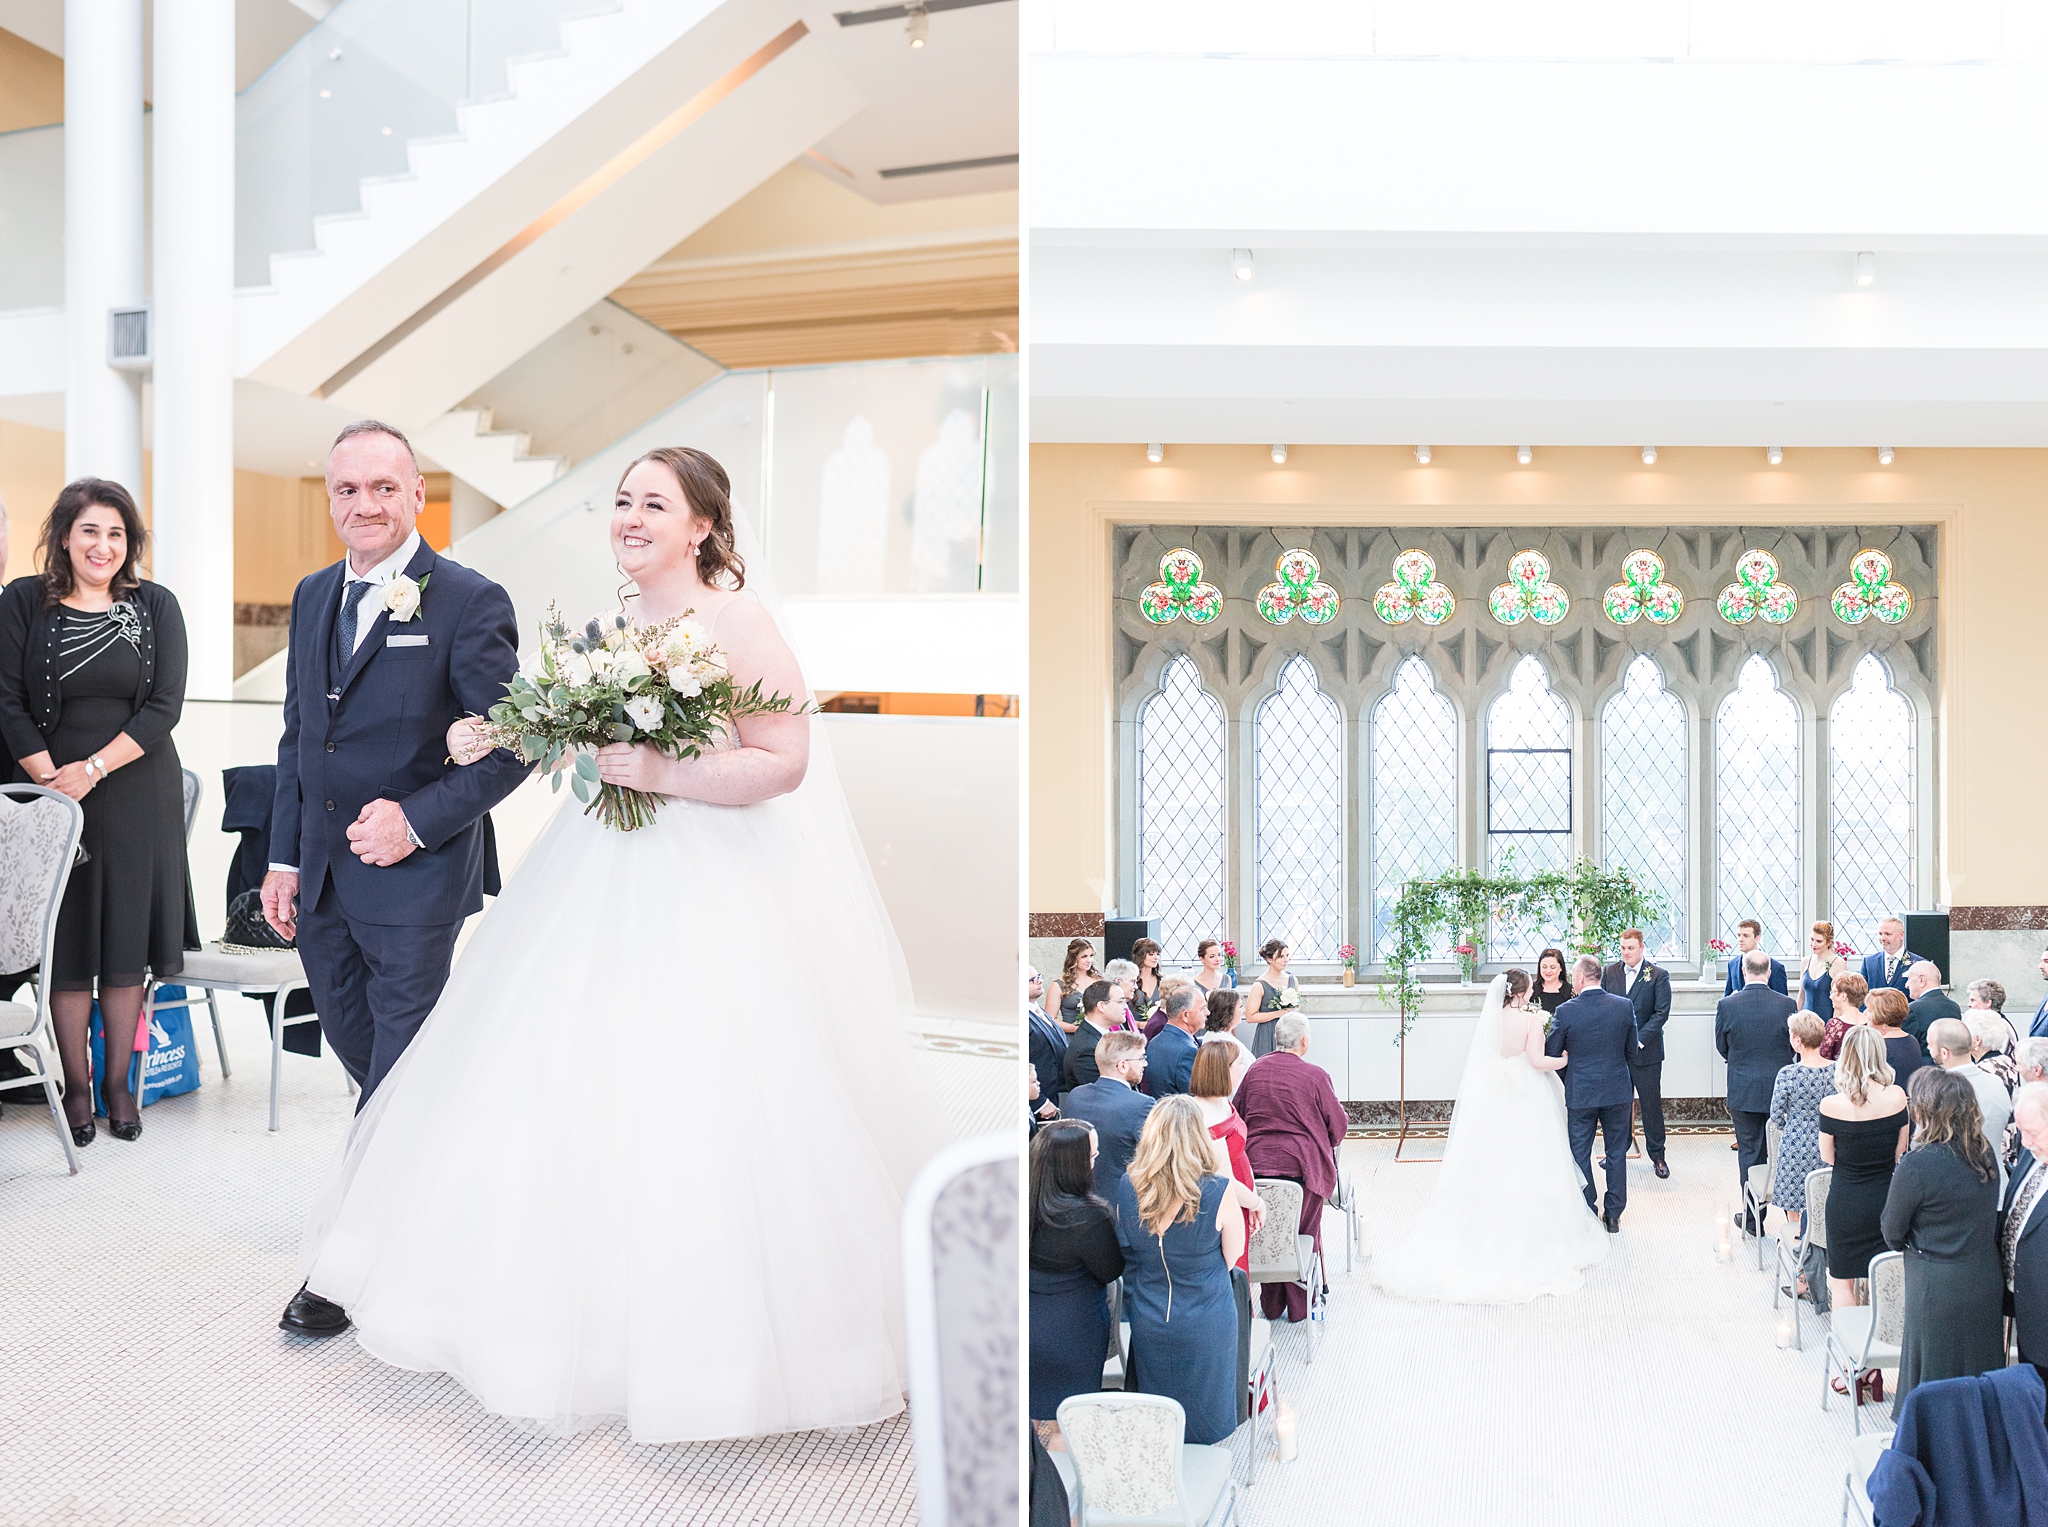 Autumn wedding at the canadian museum of nature | ottawa wedding | wedding photos at the canadian museum of nature get more inspiration from this lovely autumn wedding. #ottawawedding #weddingphotography #ottawaweddings